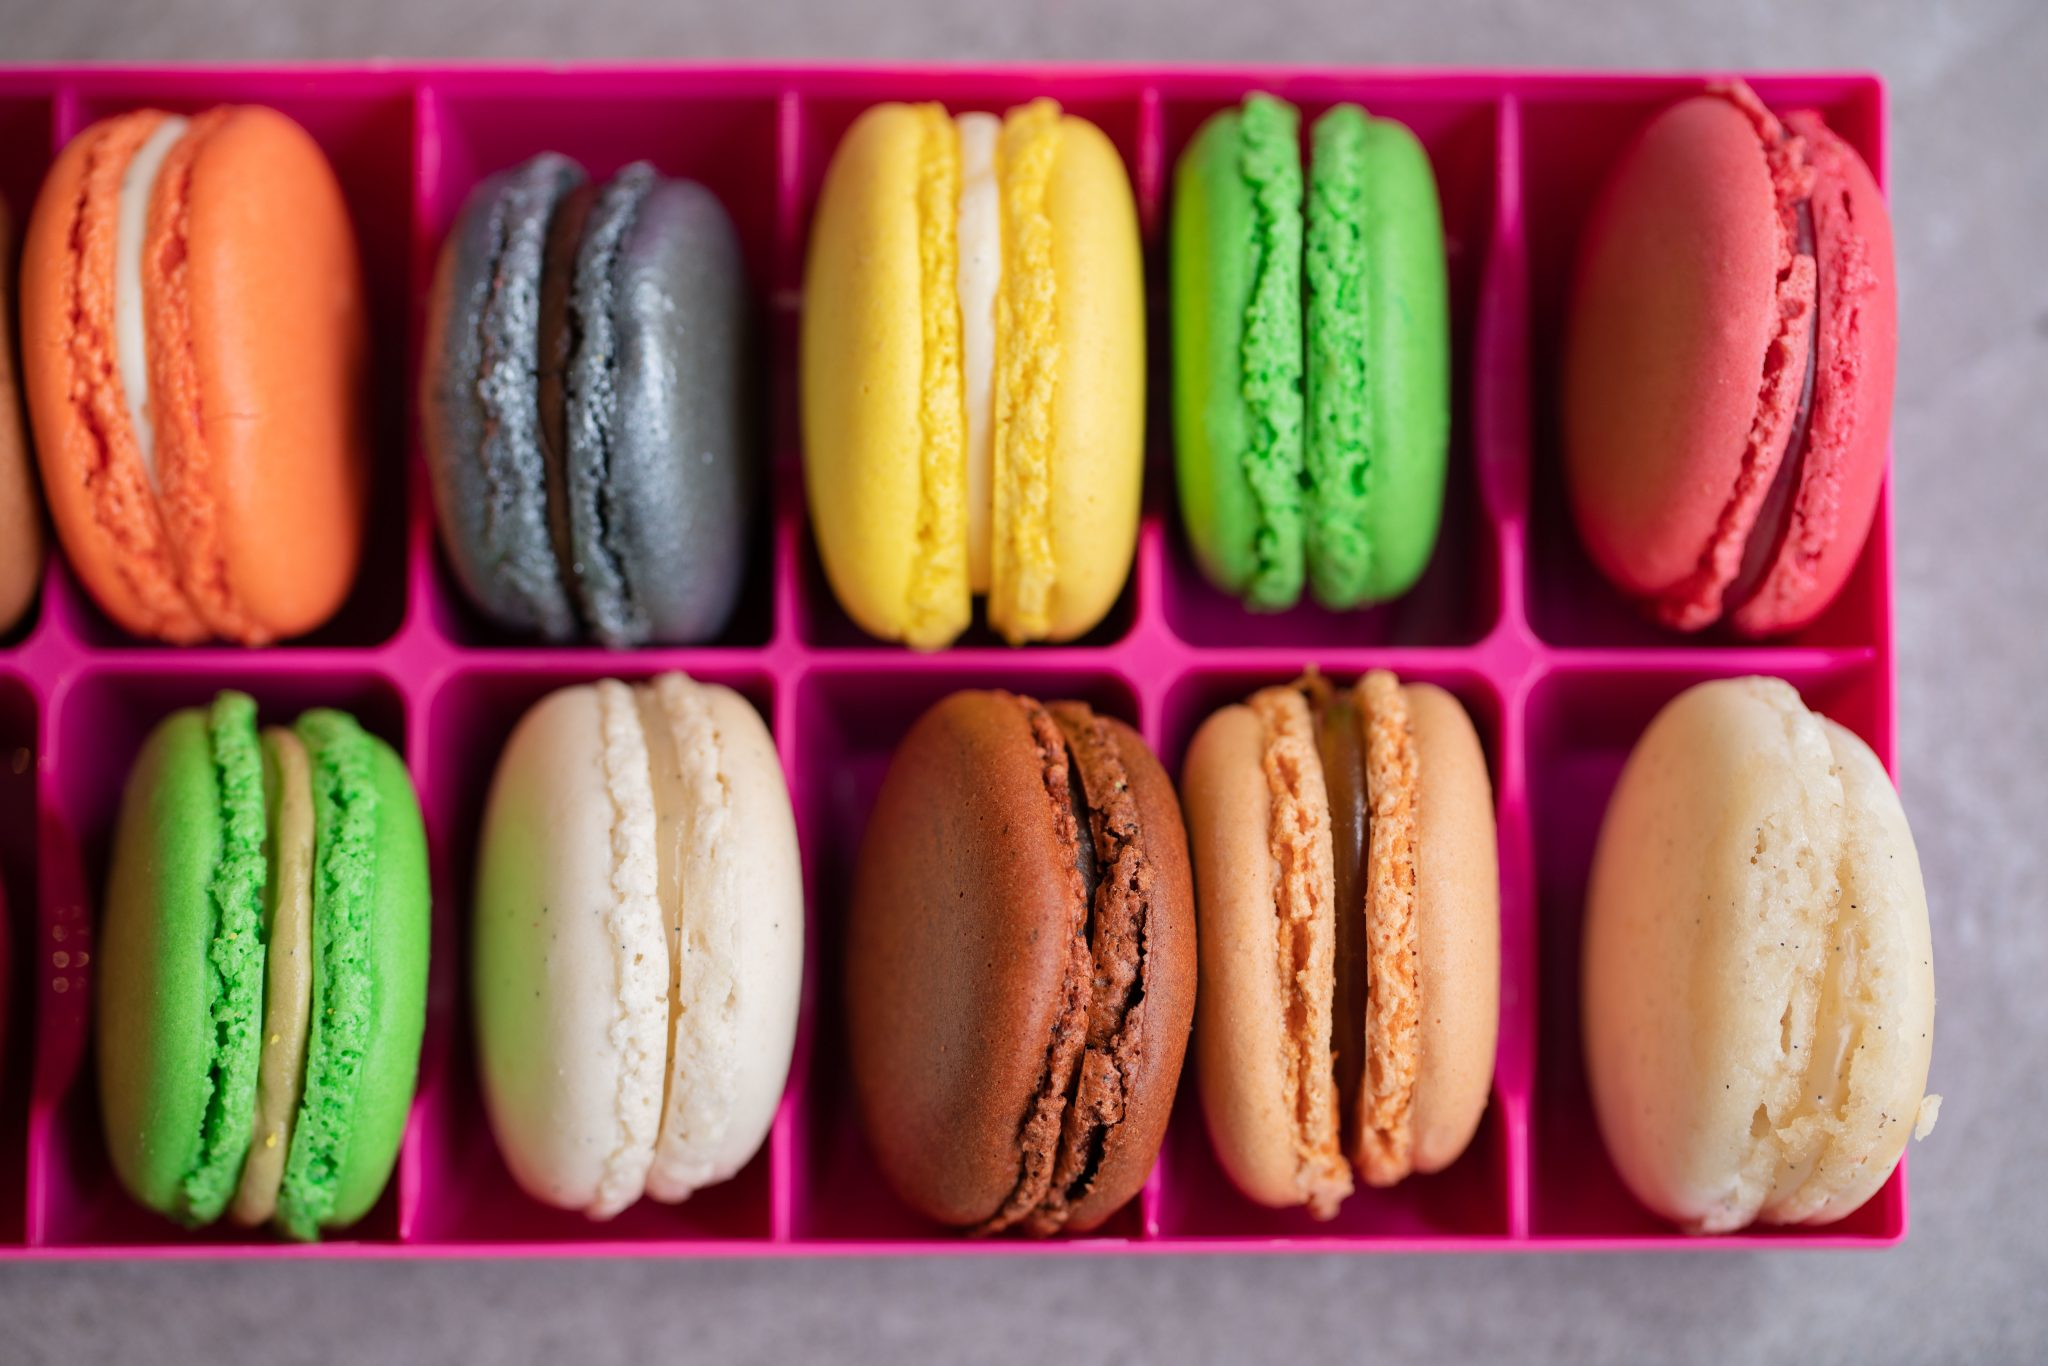 Commercial photo of a box of colourful macarons